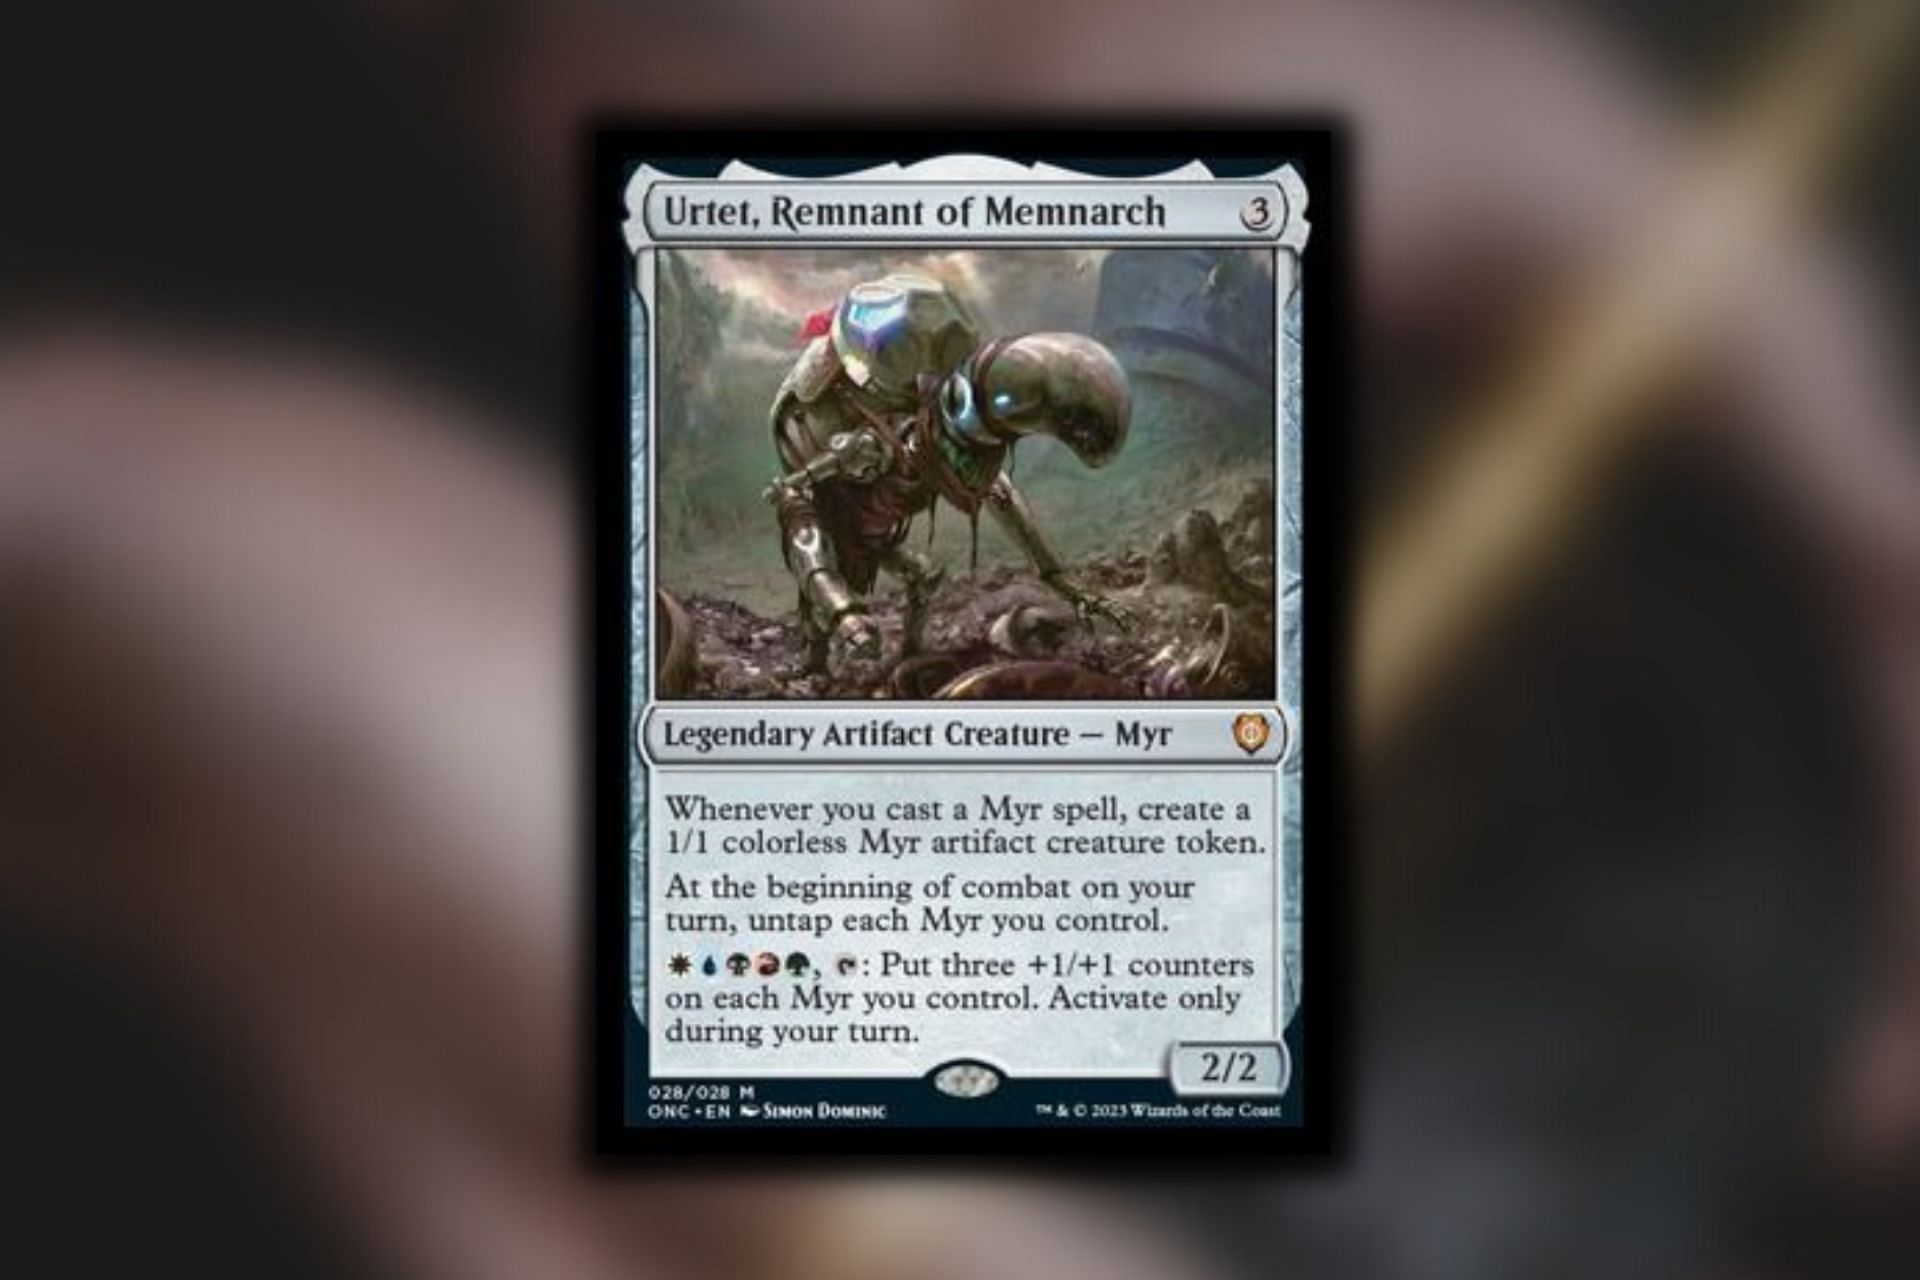 Urtet, Remains of Memnarch in Magic: The Gathering (Image via Wizards of the Coast)